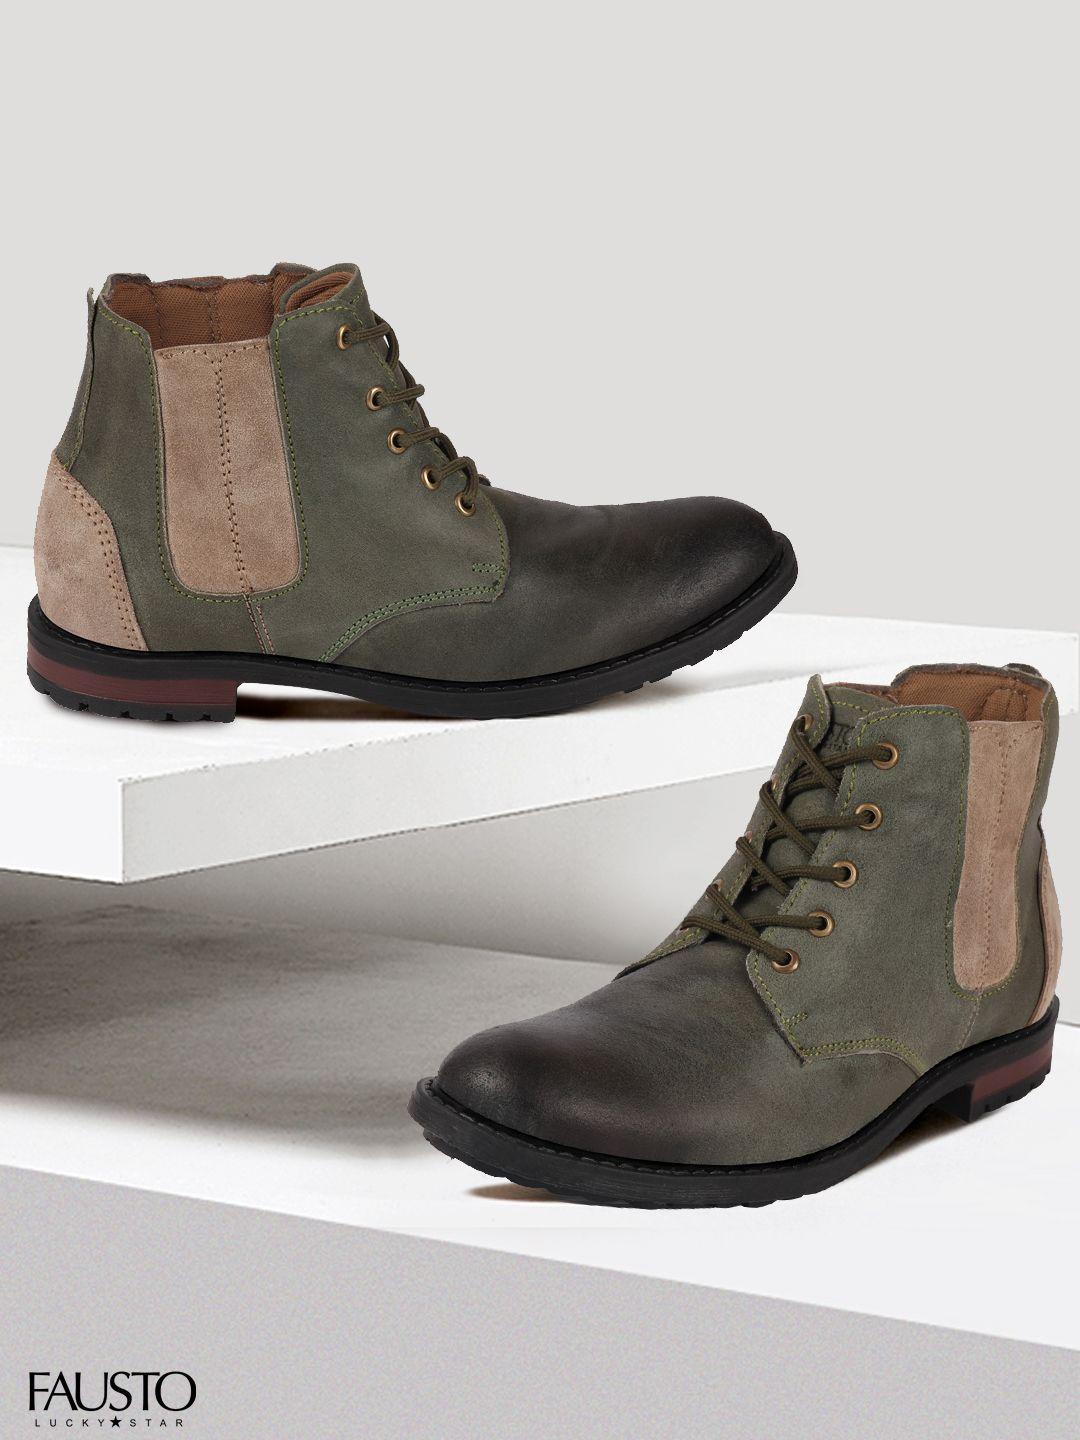 fausto men olive green colourblocked leather flat boots